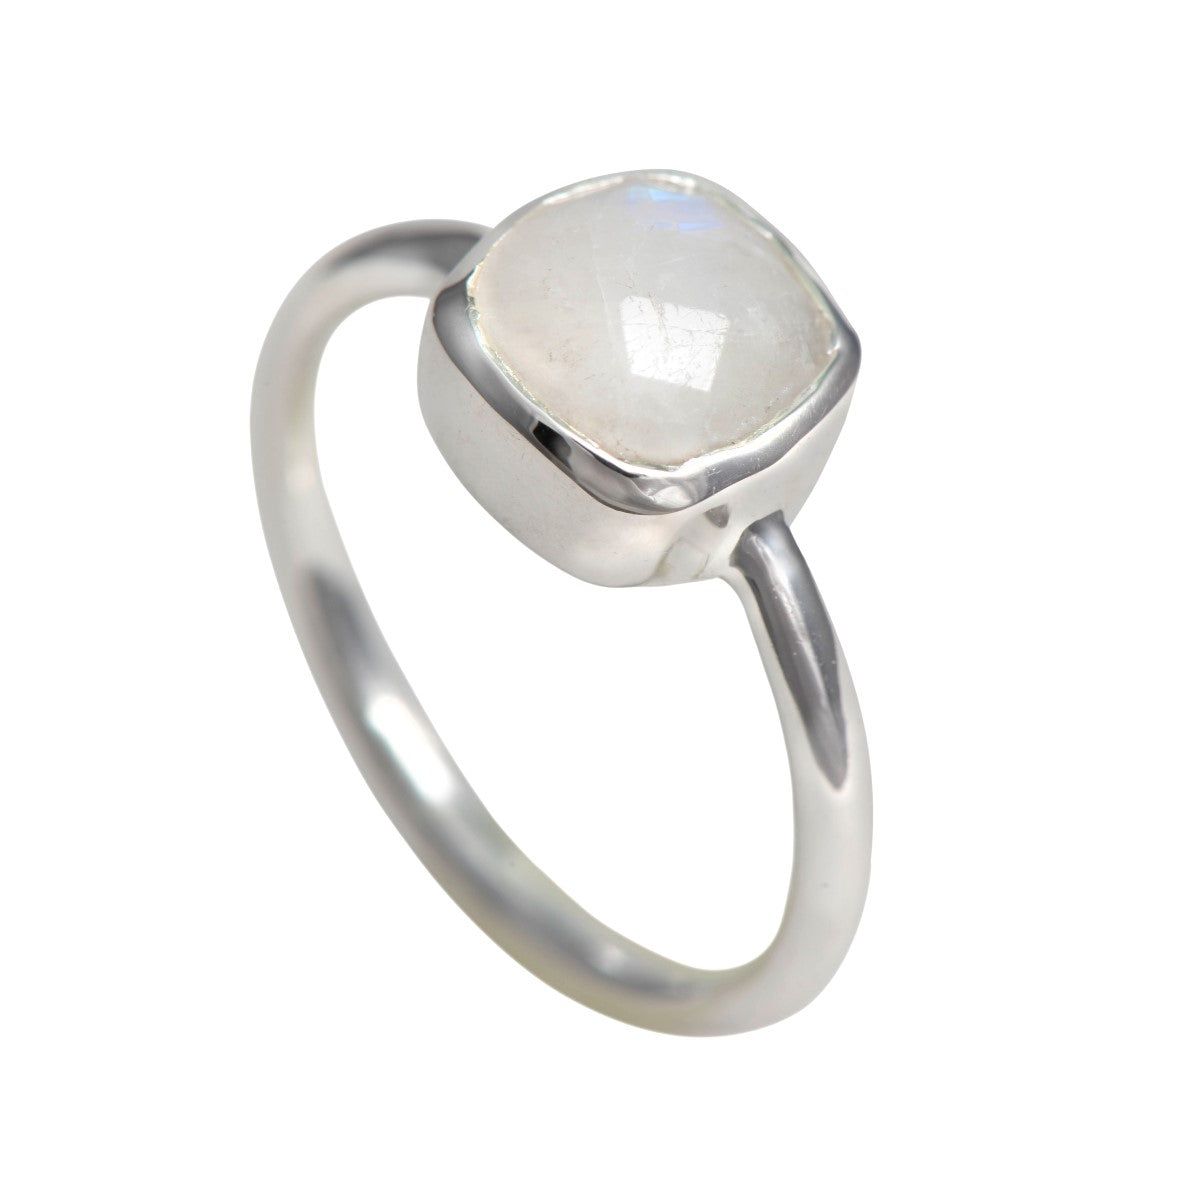 Faceted Square Cut Natural Gemstone Sterling Silver Solitaire Ring - Moonstone